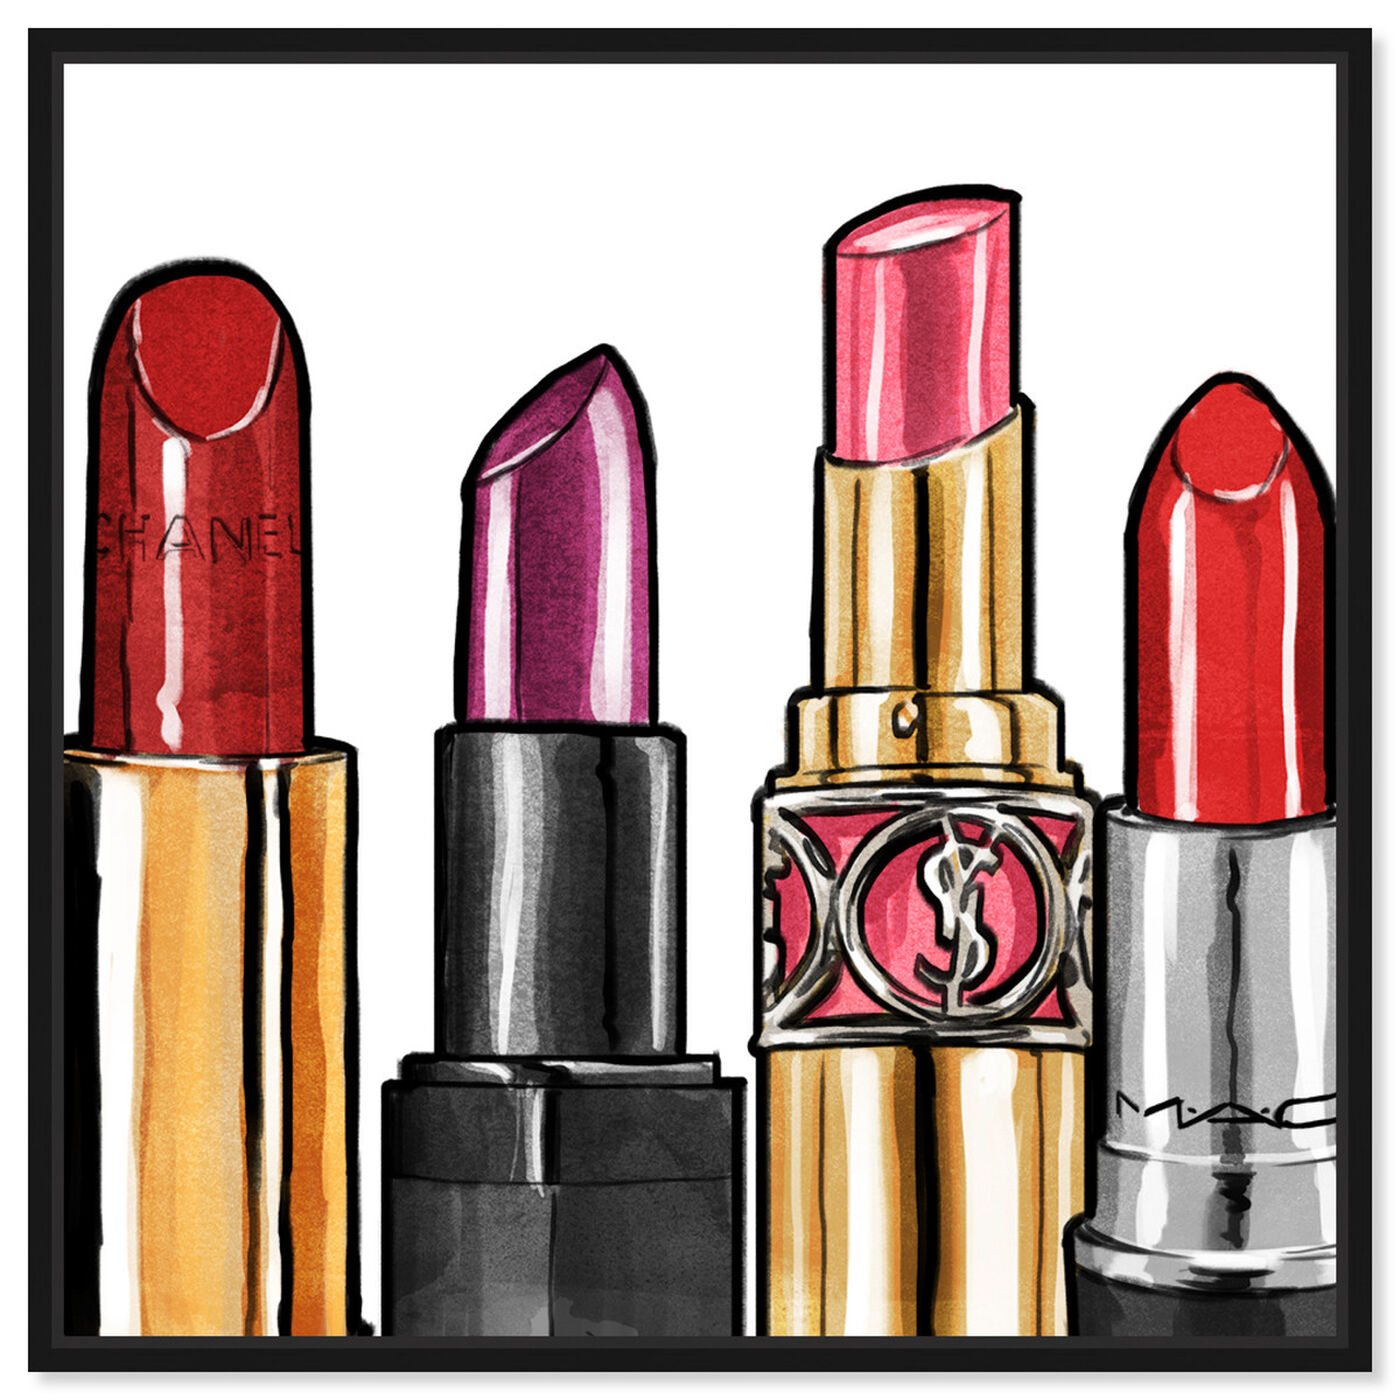 Front view of Red Lipstick featuring fashion and glam and makeup art.